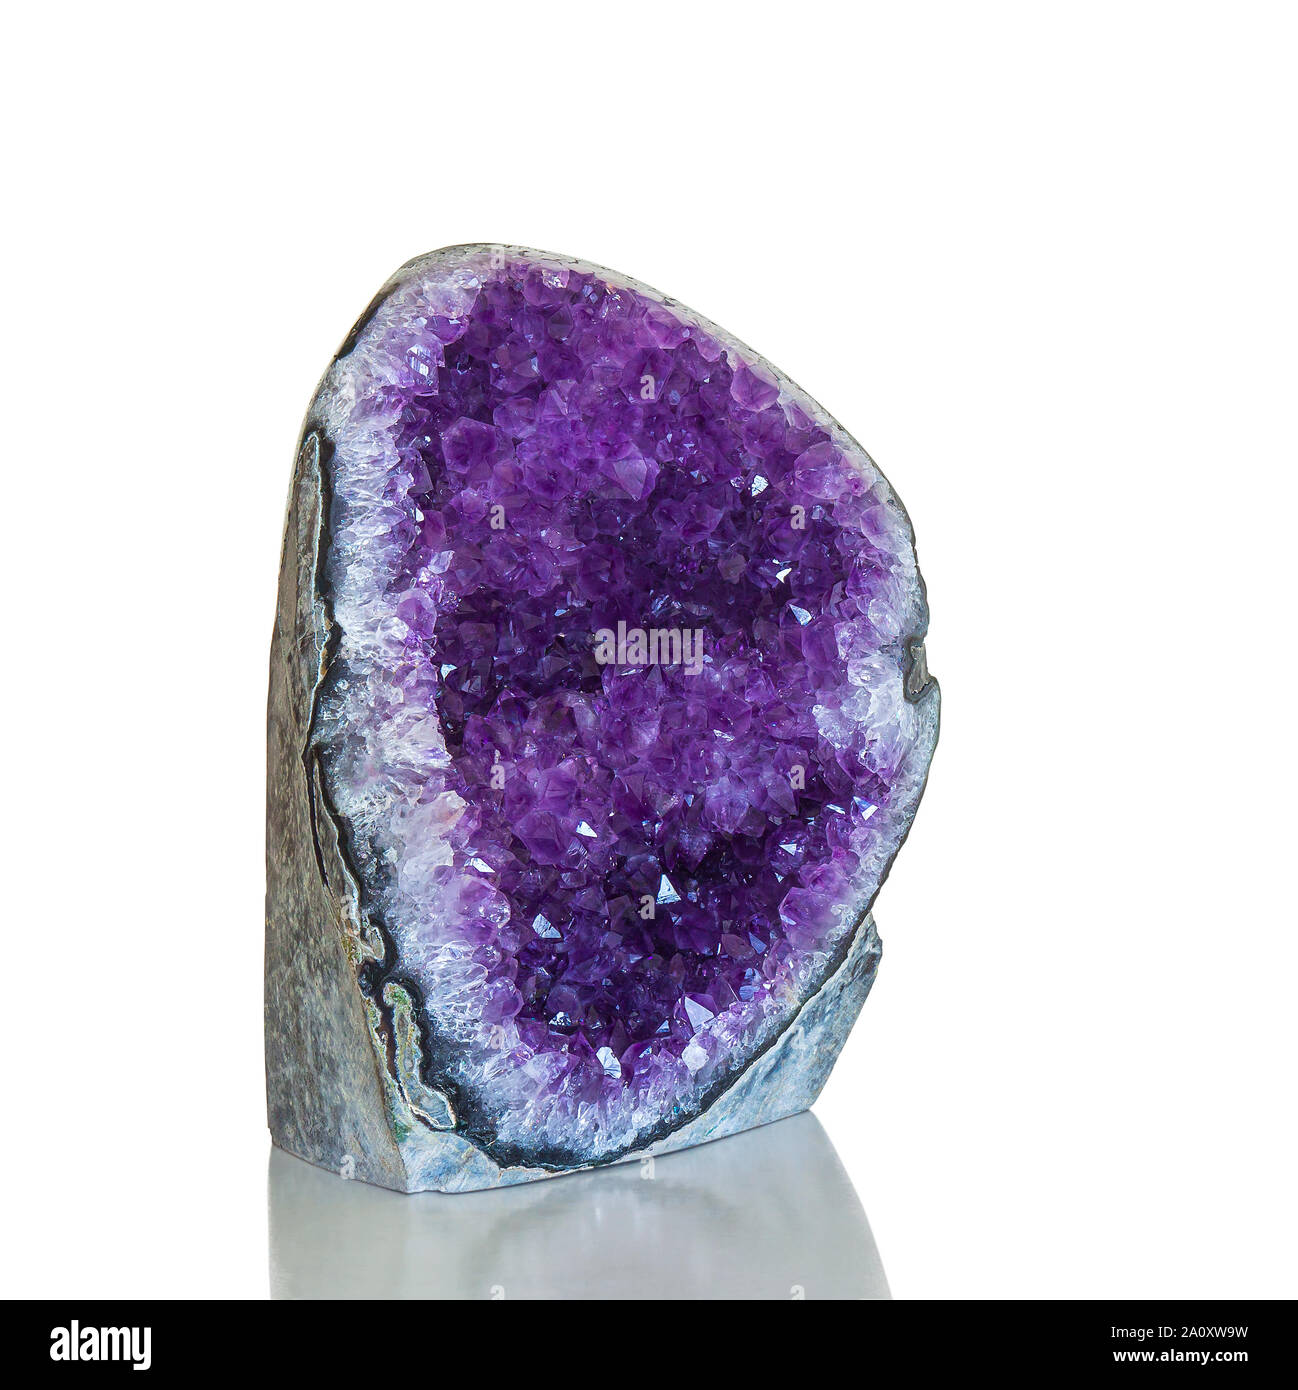 Amethyst crystal, semiprecious gem isolated on white background with clipping path. Stock Photo